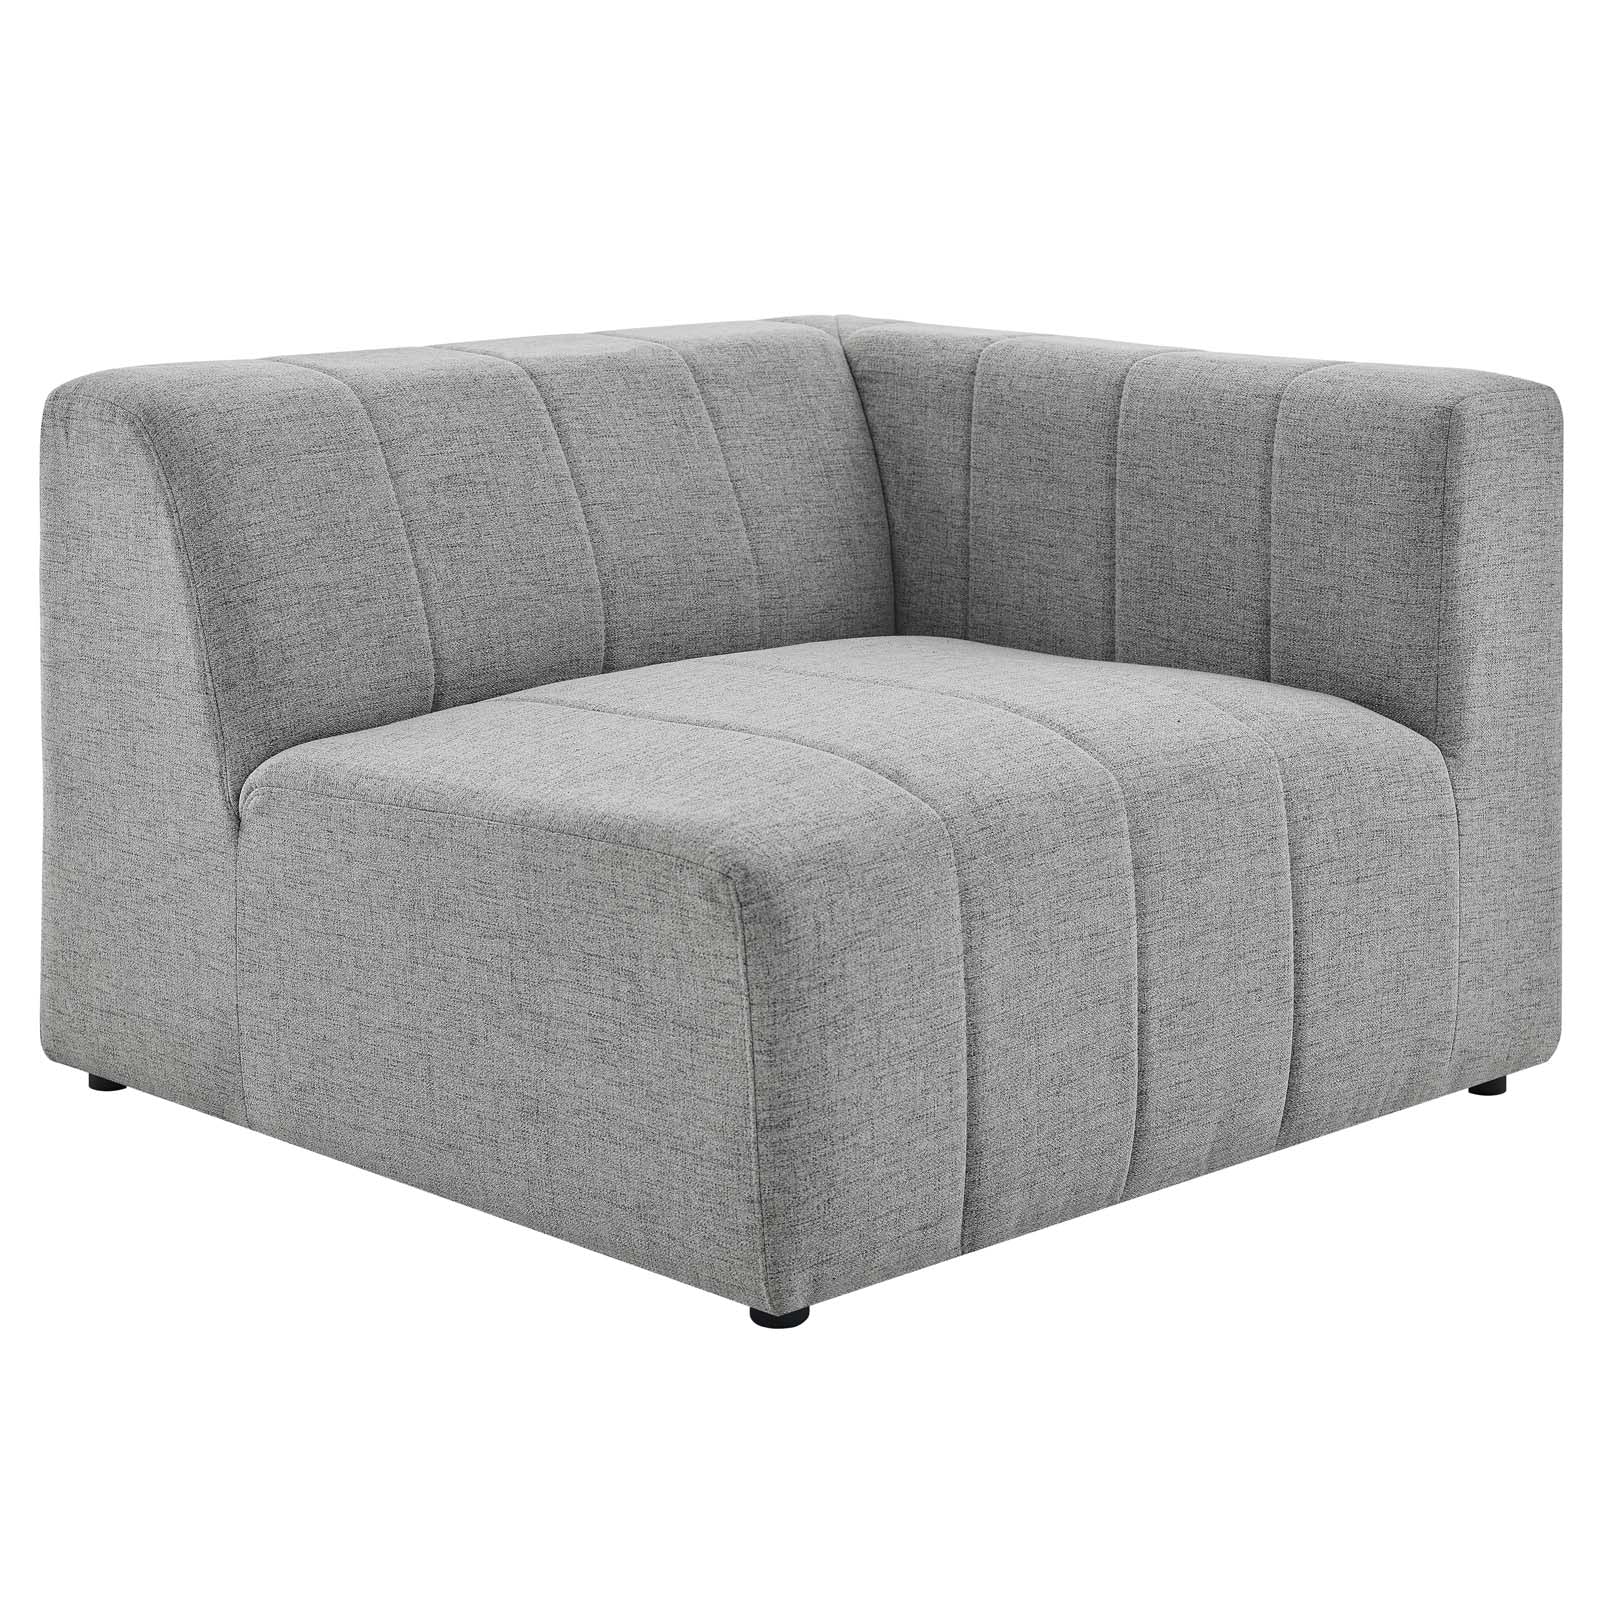 Modway Sectional Sofas - Bartlett Upholstered Fabric 27.5 " H 5-Piece Sectional Sofa Light Gray